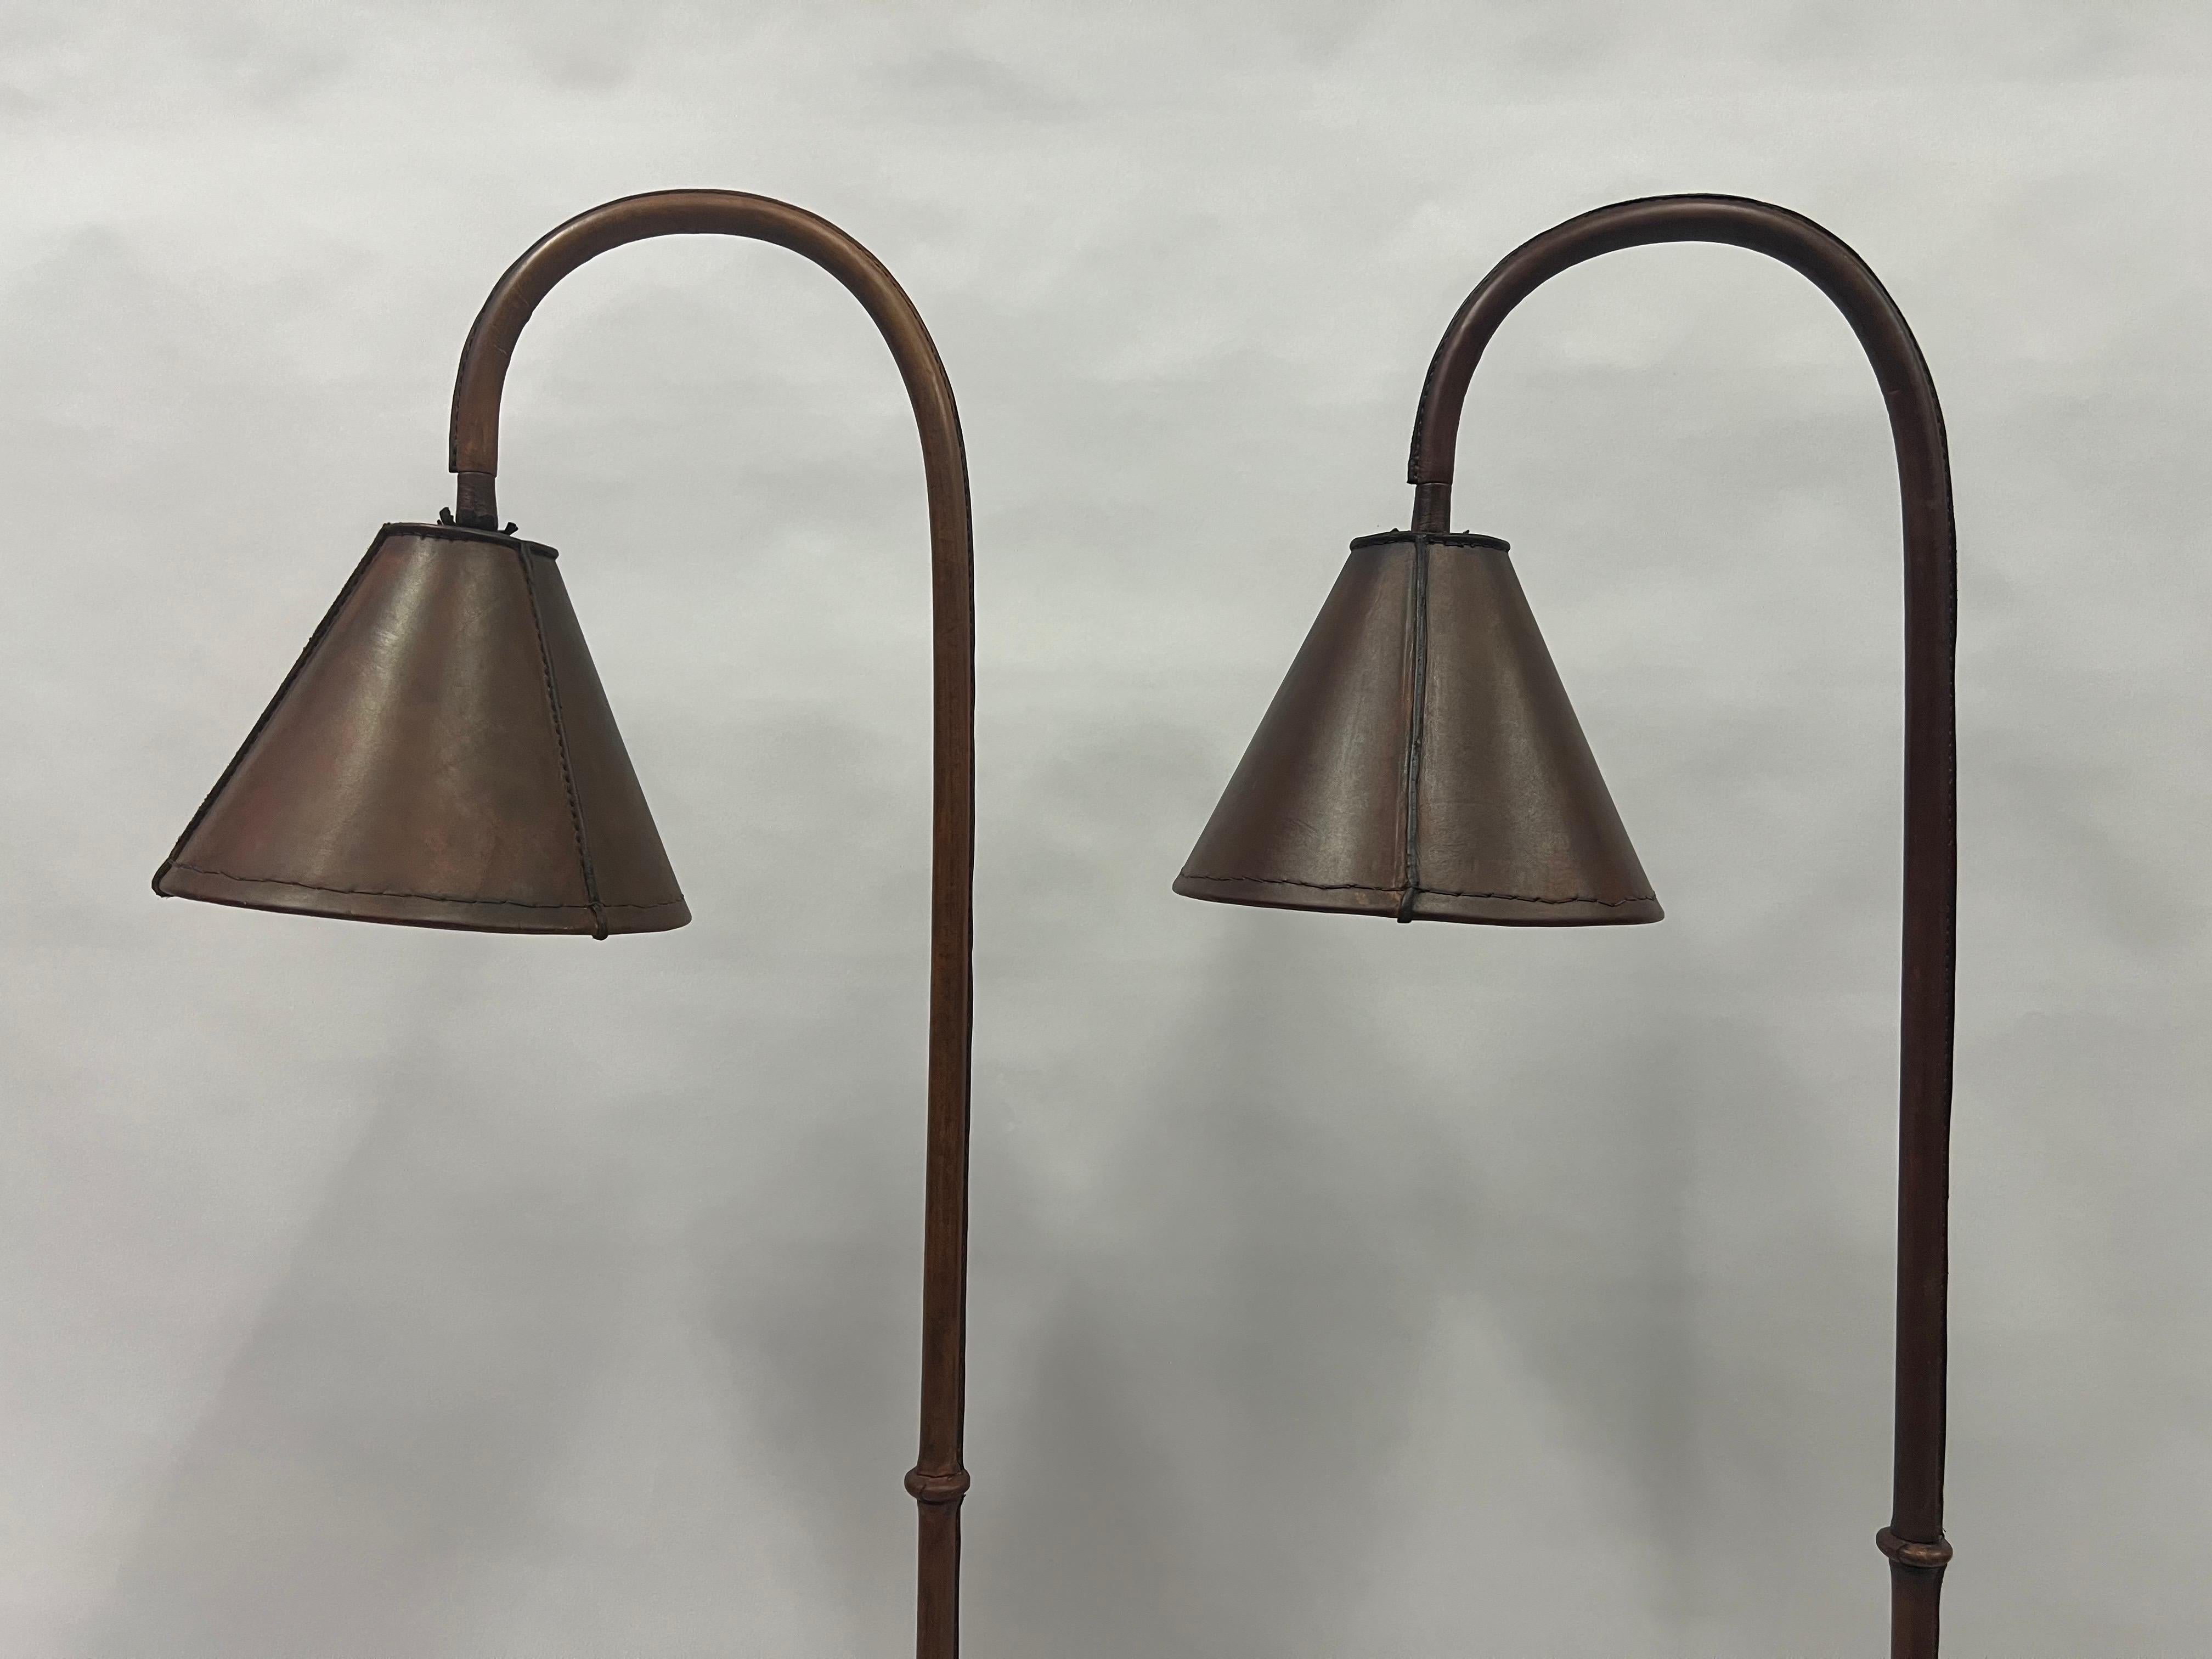 20th Century Pair of French Mid-Century Hand-Stitched Leather Floor Lamps by Jacques Adnet For Sale